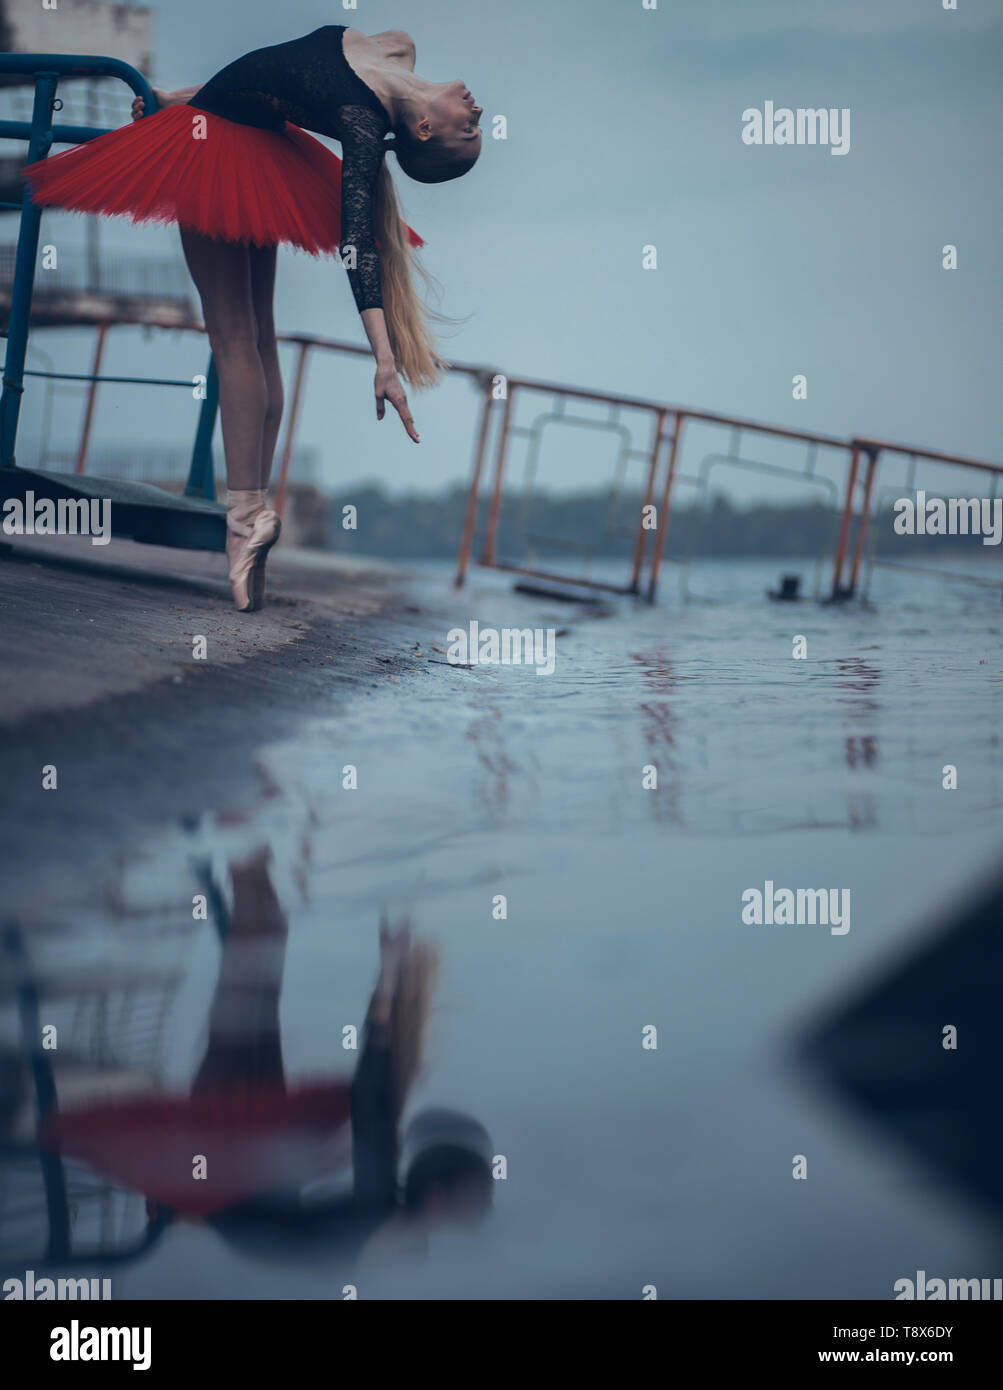 Ballerina dancing on the coast of river in a black and red tutu and her reflection in the water. Stock Photo